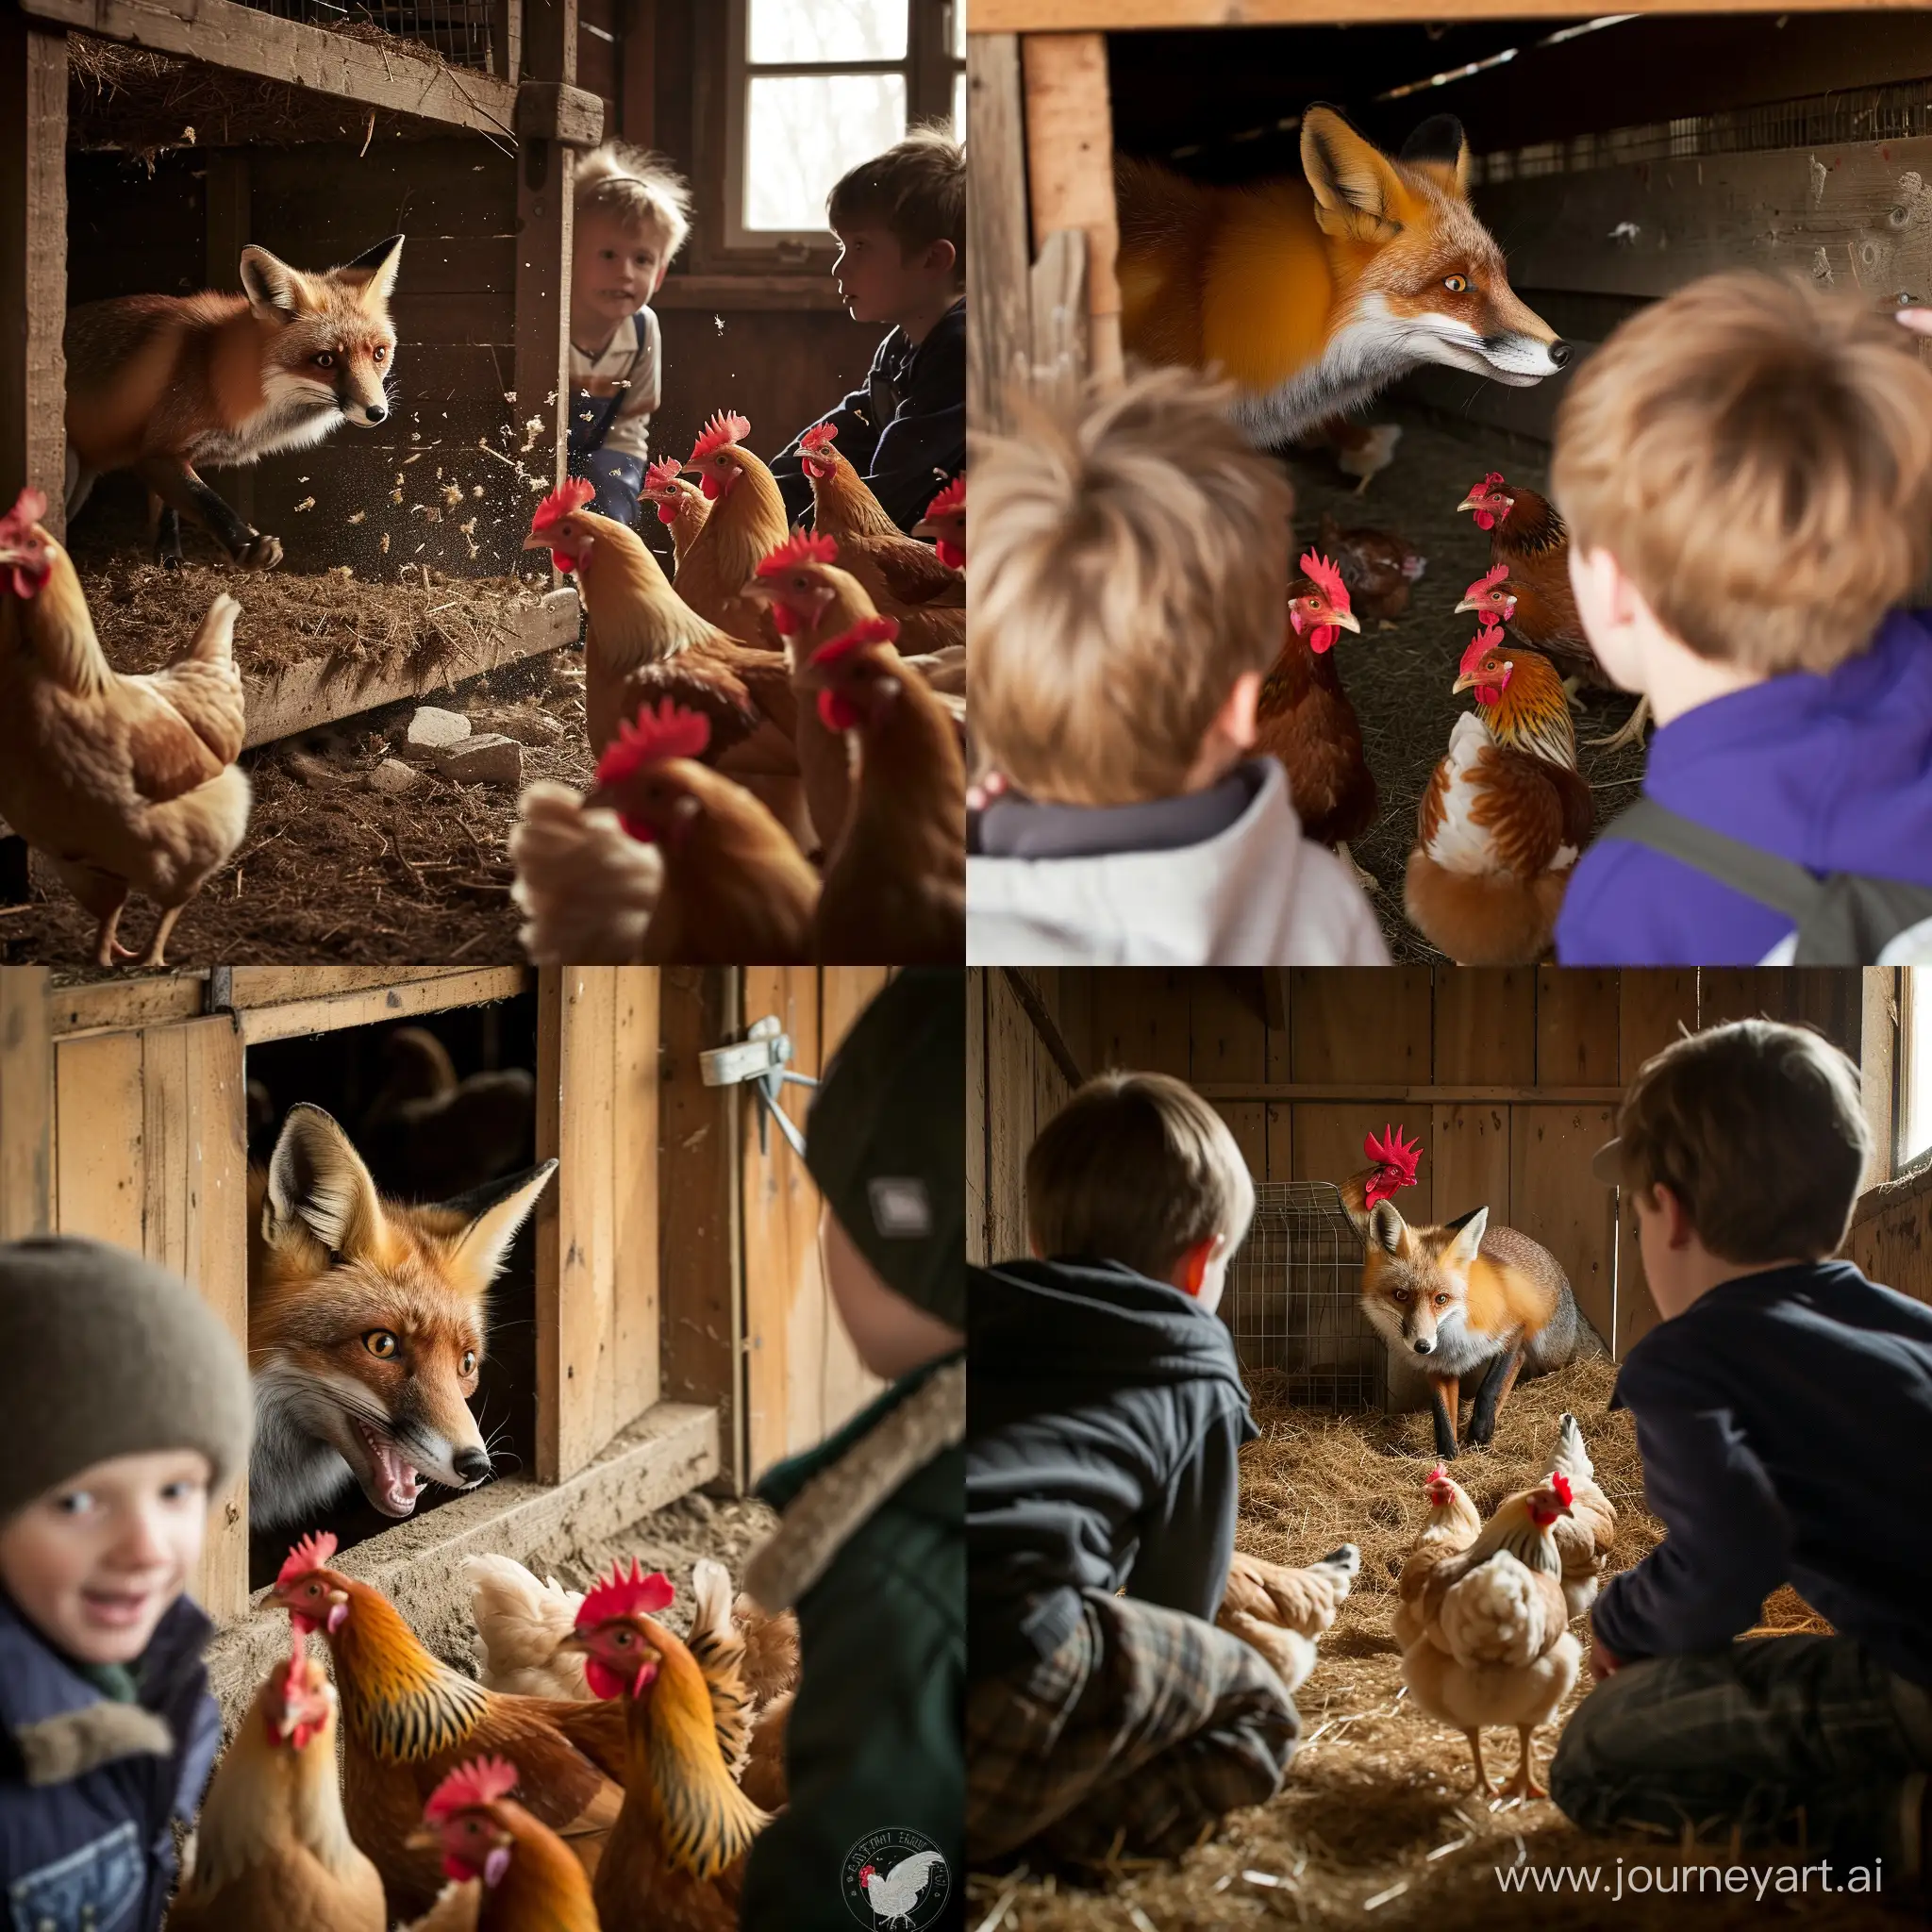 An image of a fox sneaking in the chicken coop, the chickens are panicking and run away, two boys are trying the fox doing that, photo